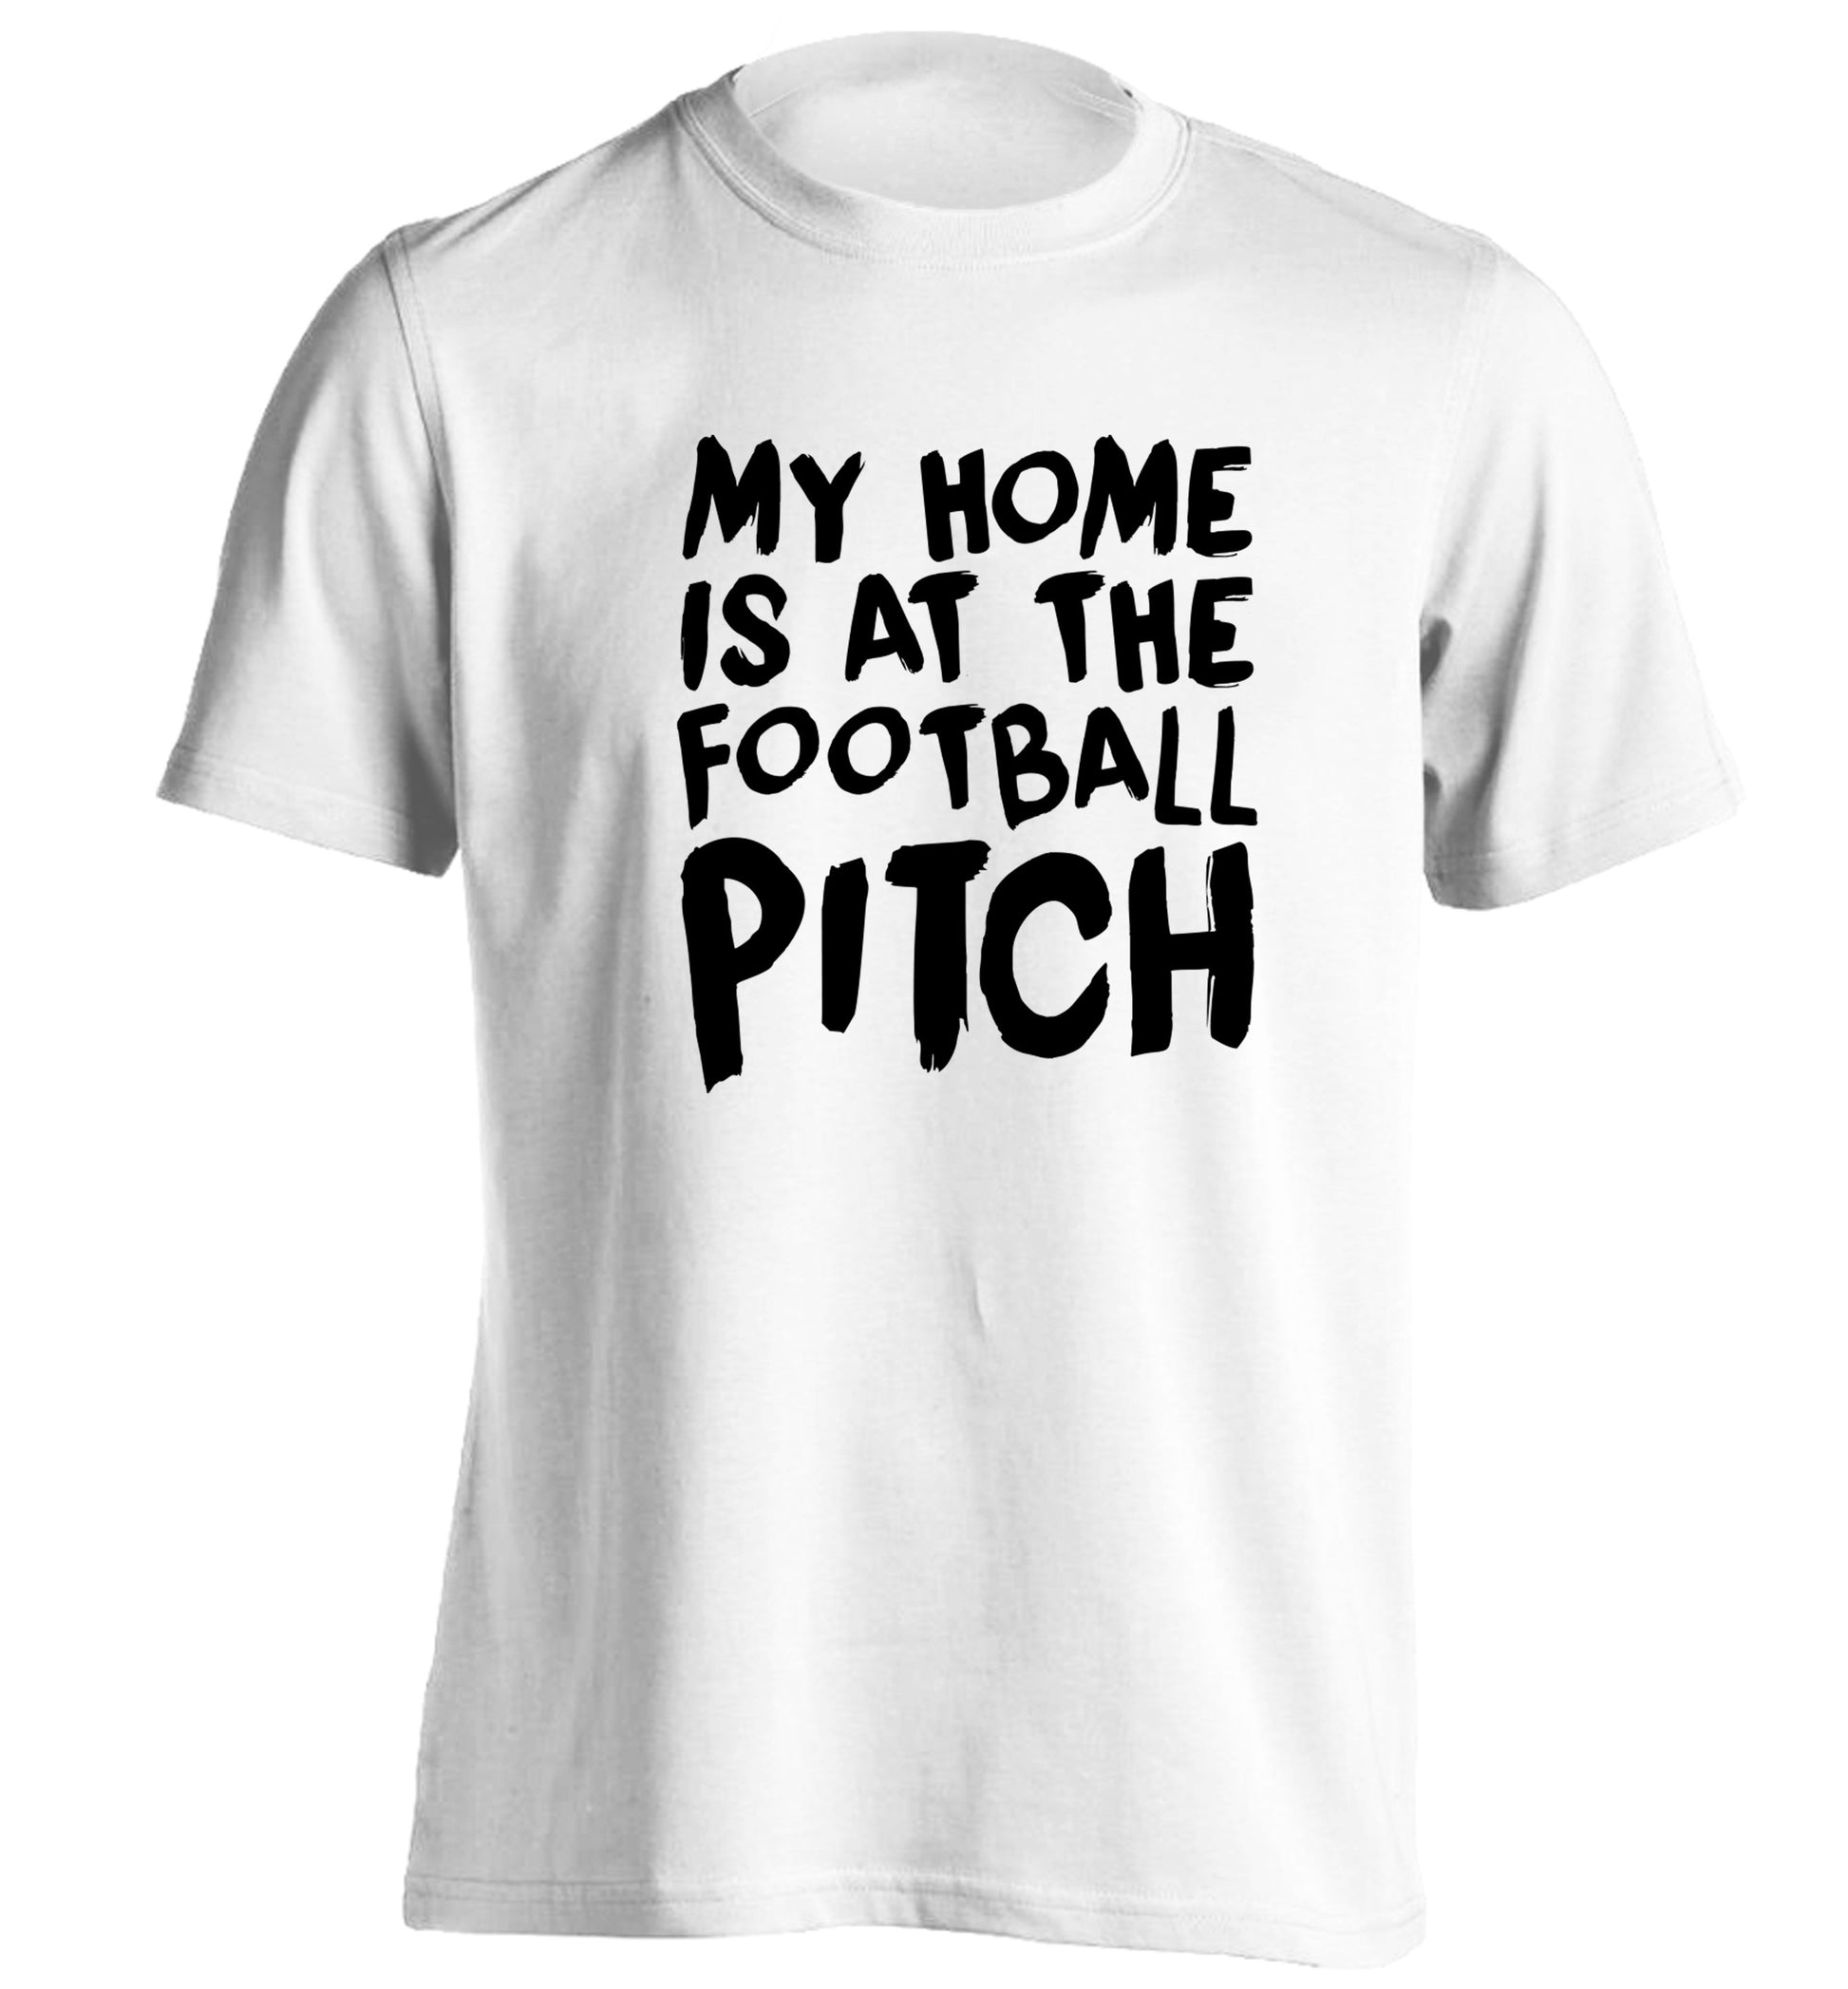 My home is at the football pitch adults unisex white Tshirt 2XL